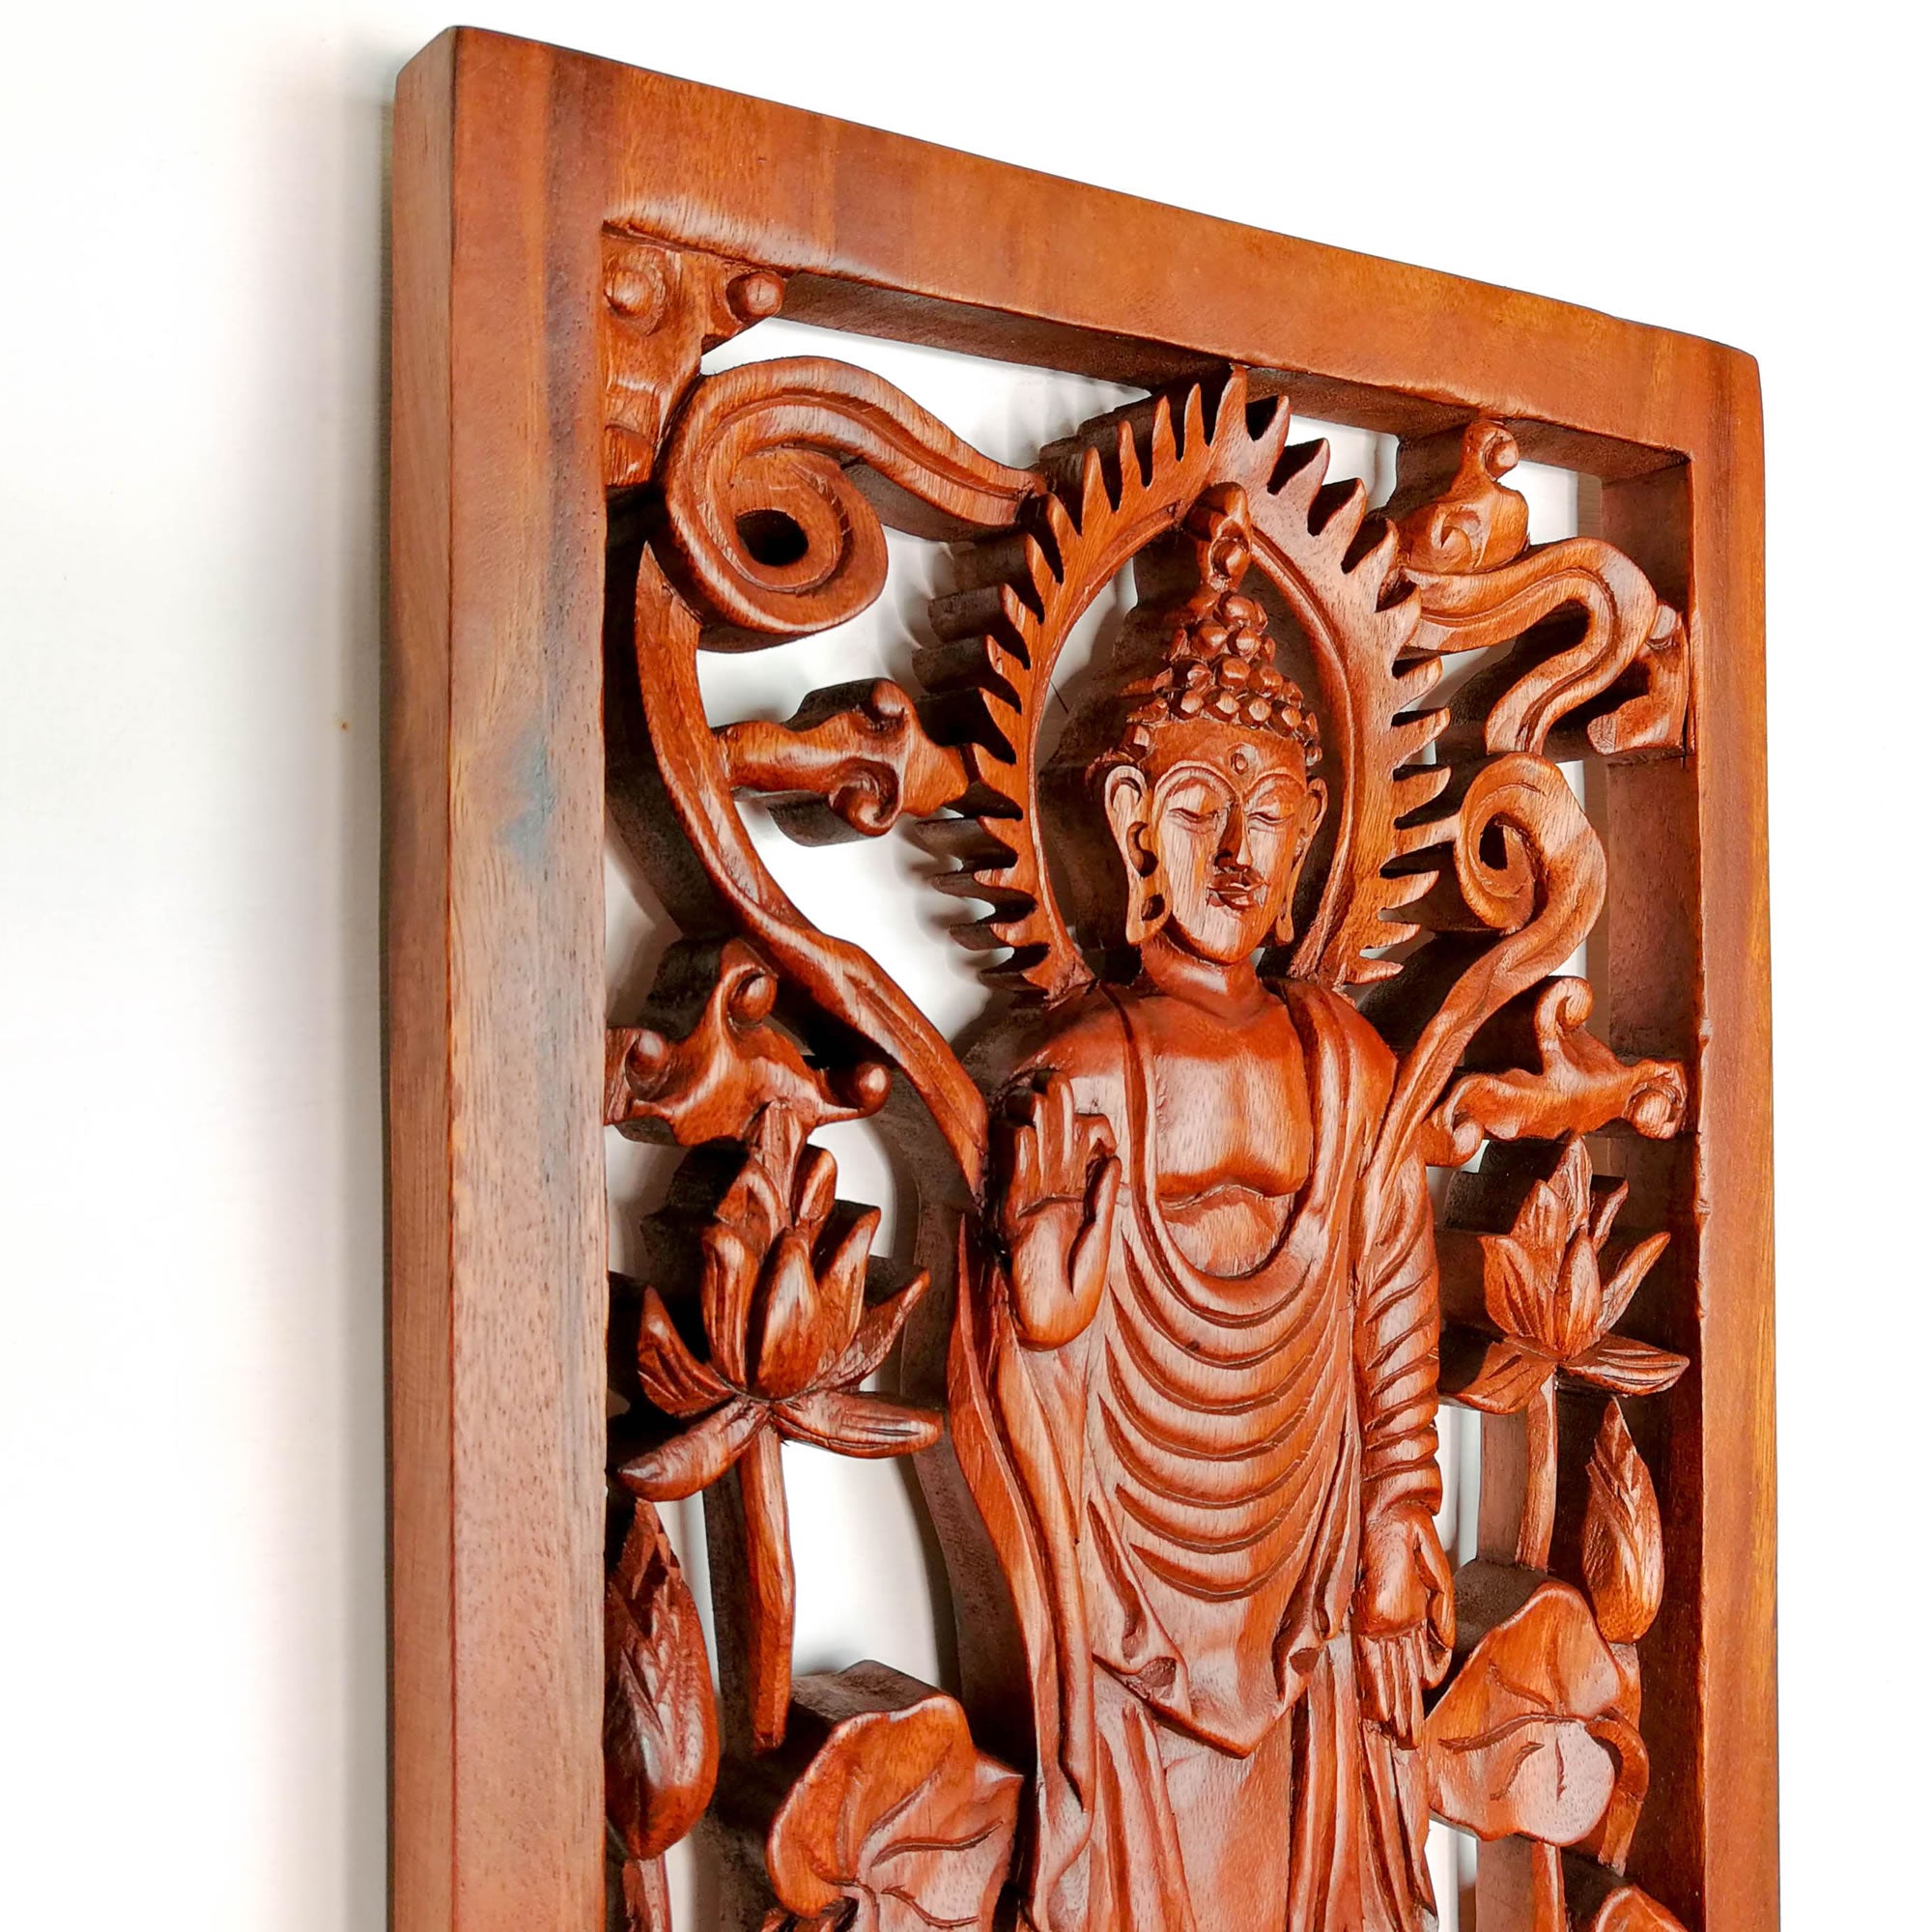 Hand Carved Wooden Wall Art Decorative Standing Buddha Peace Yoga Meditation